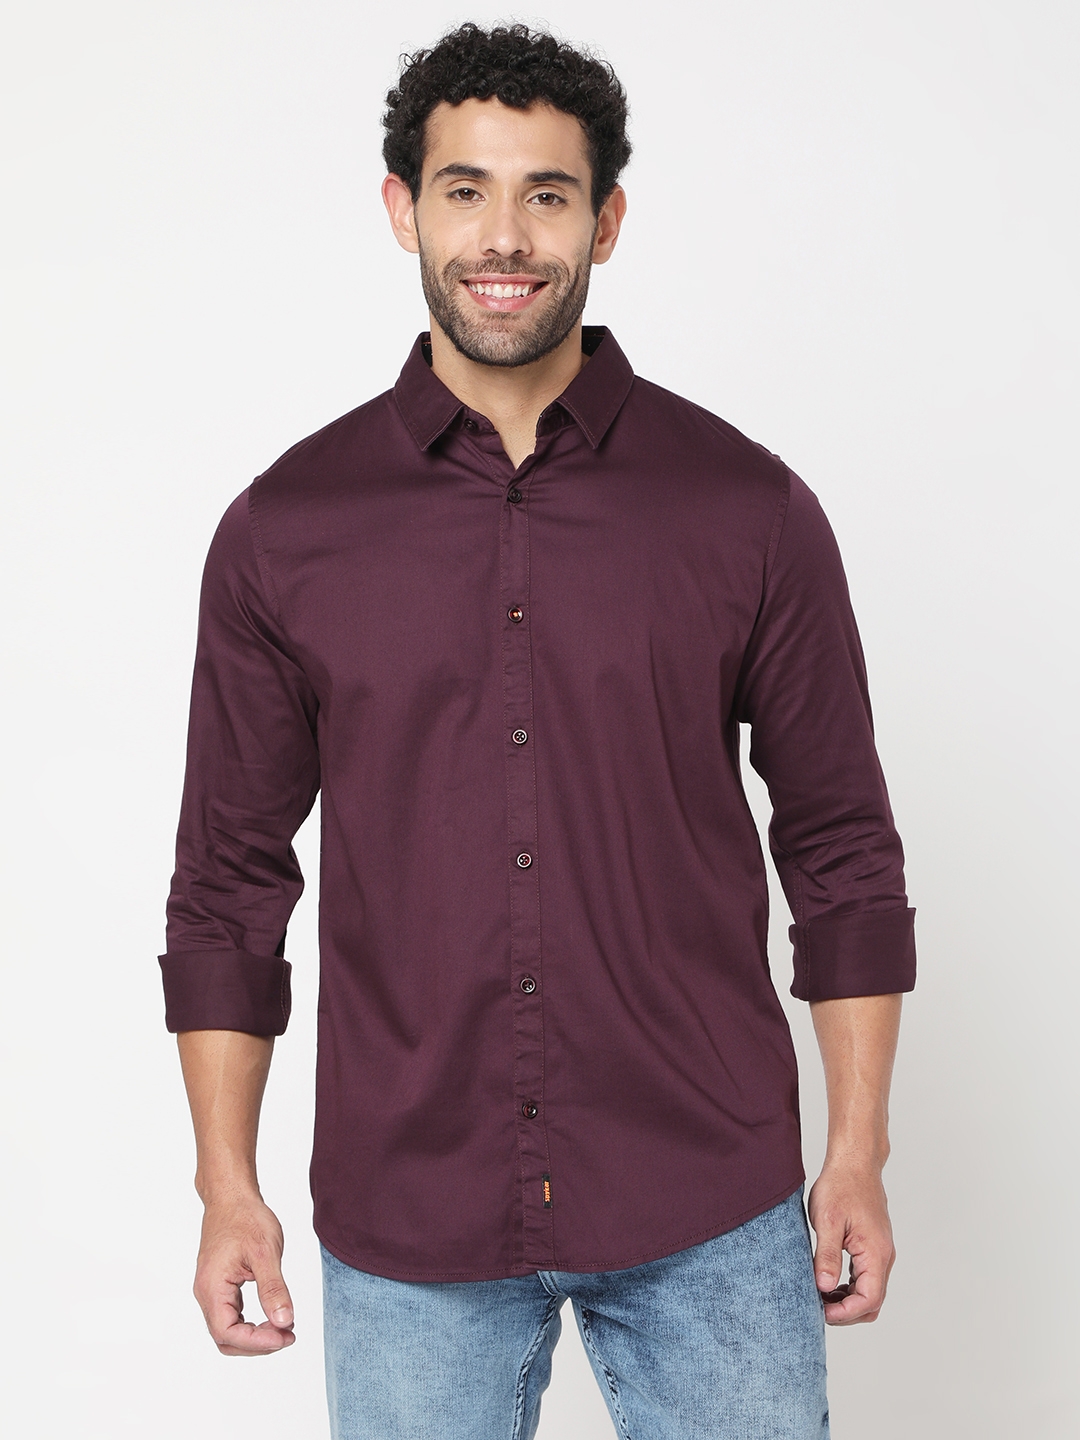 Men's Red Cotton Blend Solid Casual Shirts